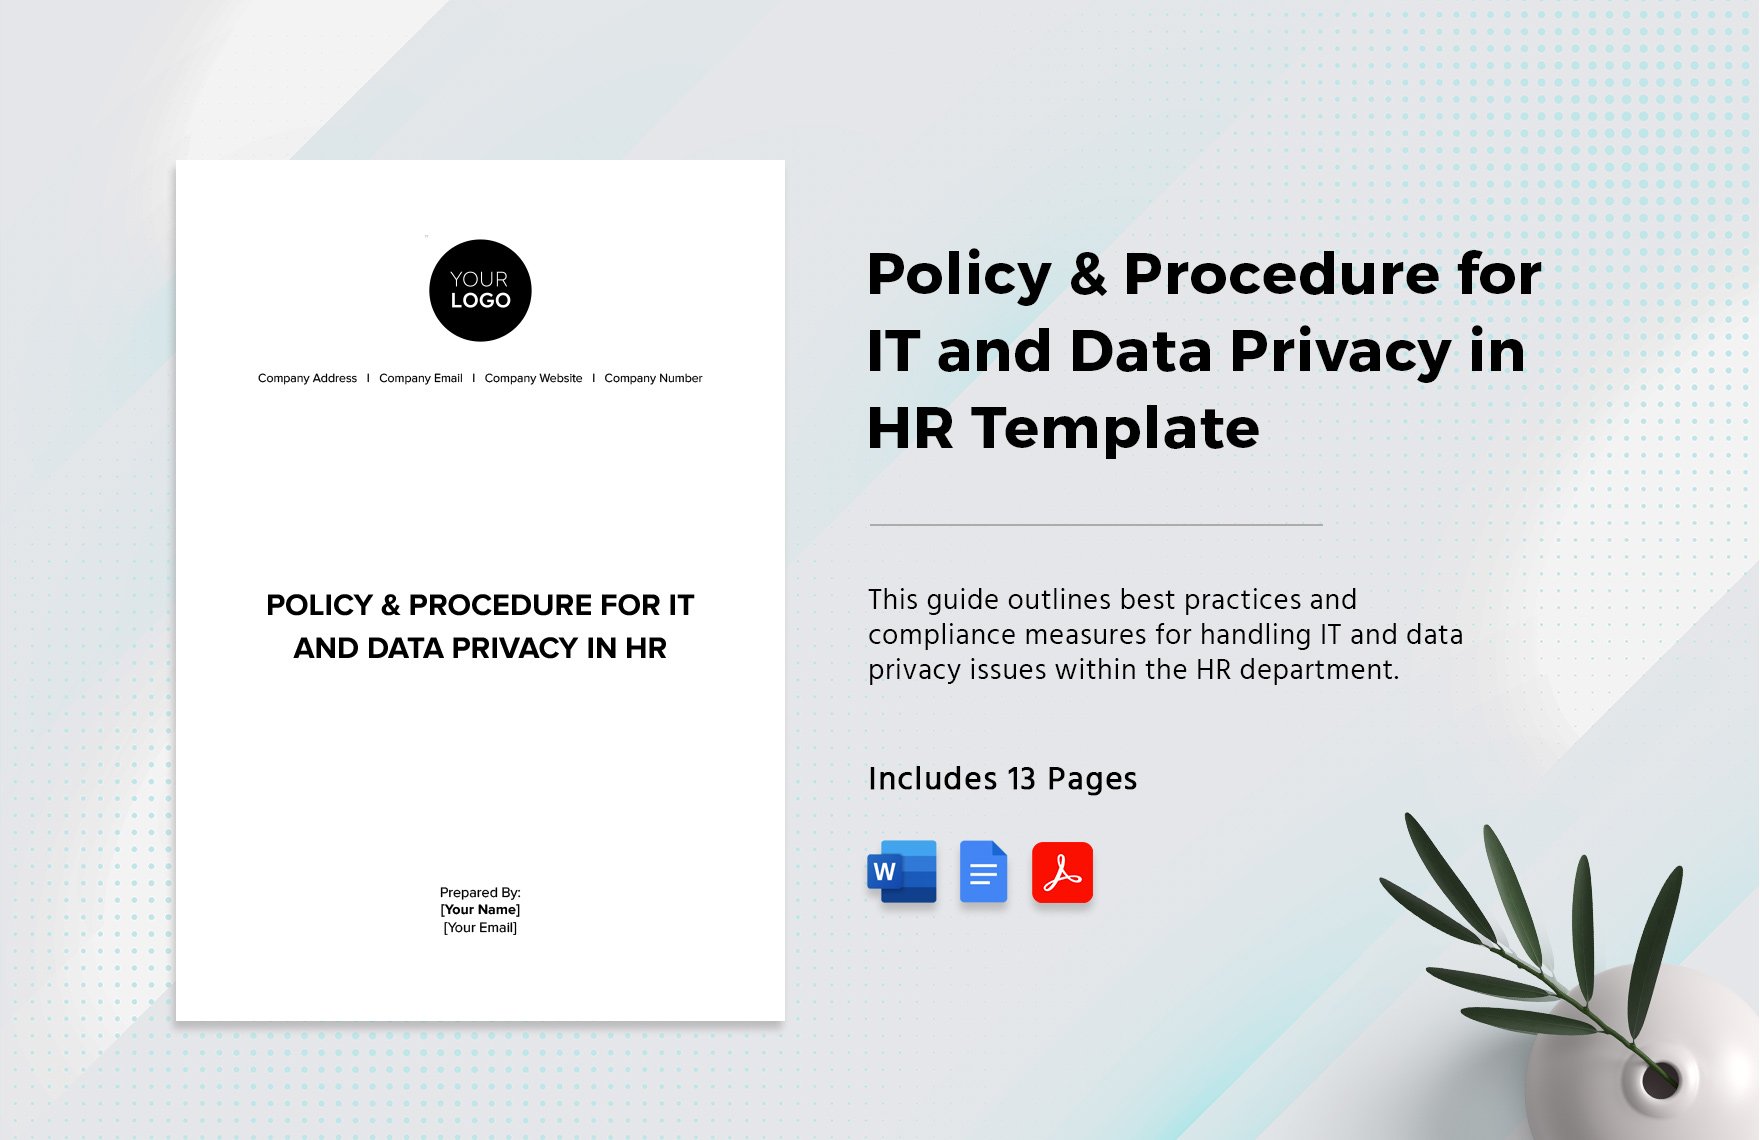 Policy & Procedure for IT and Data Privacy in HR Template